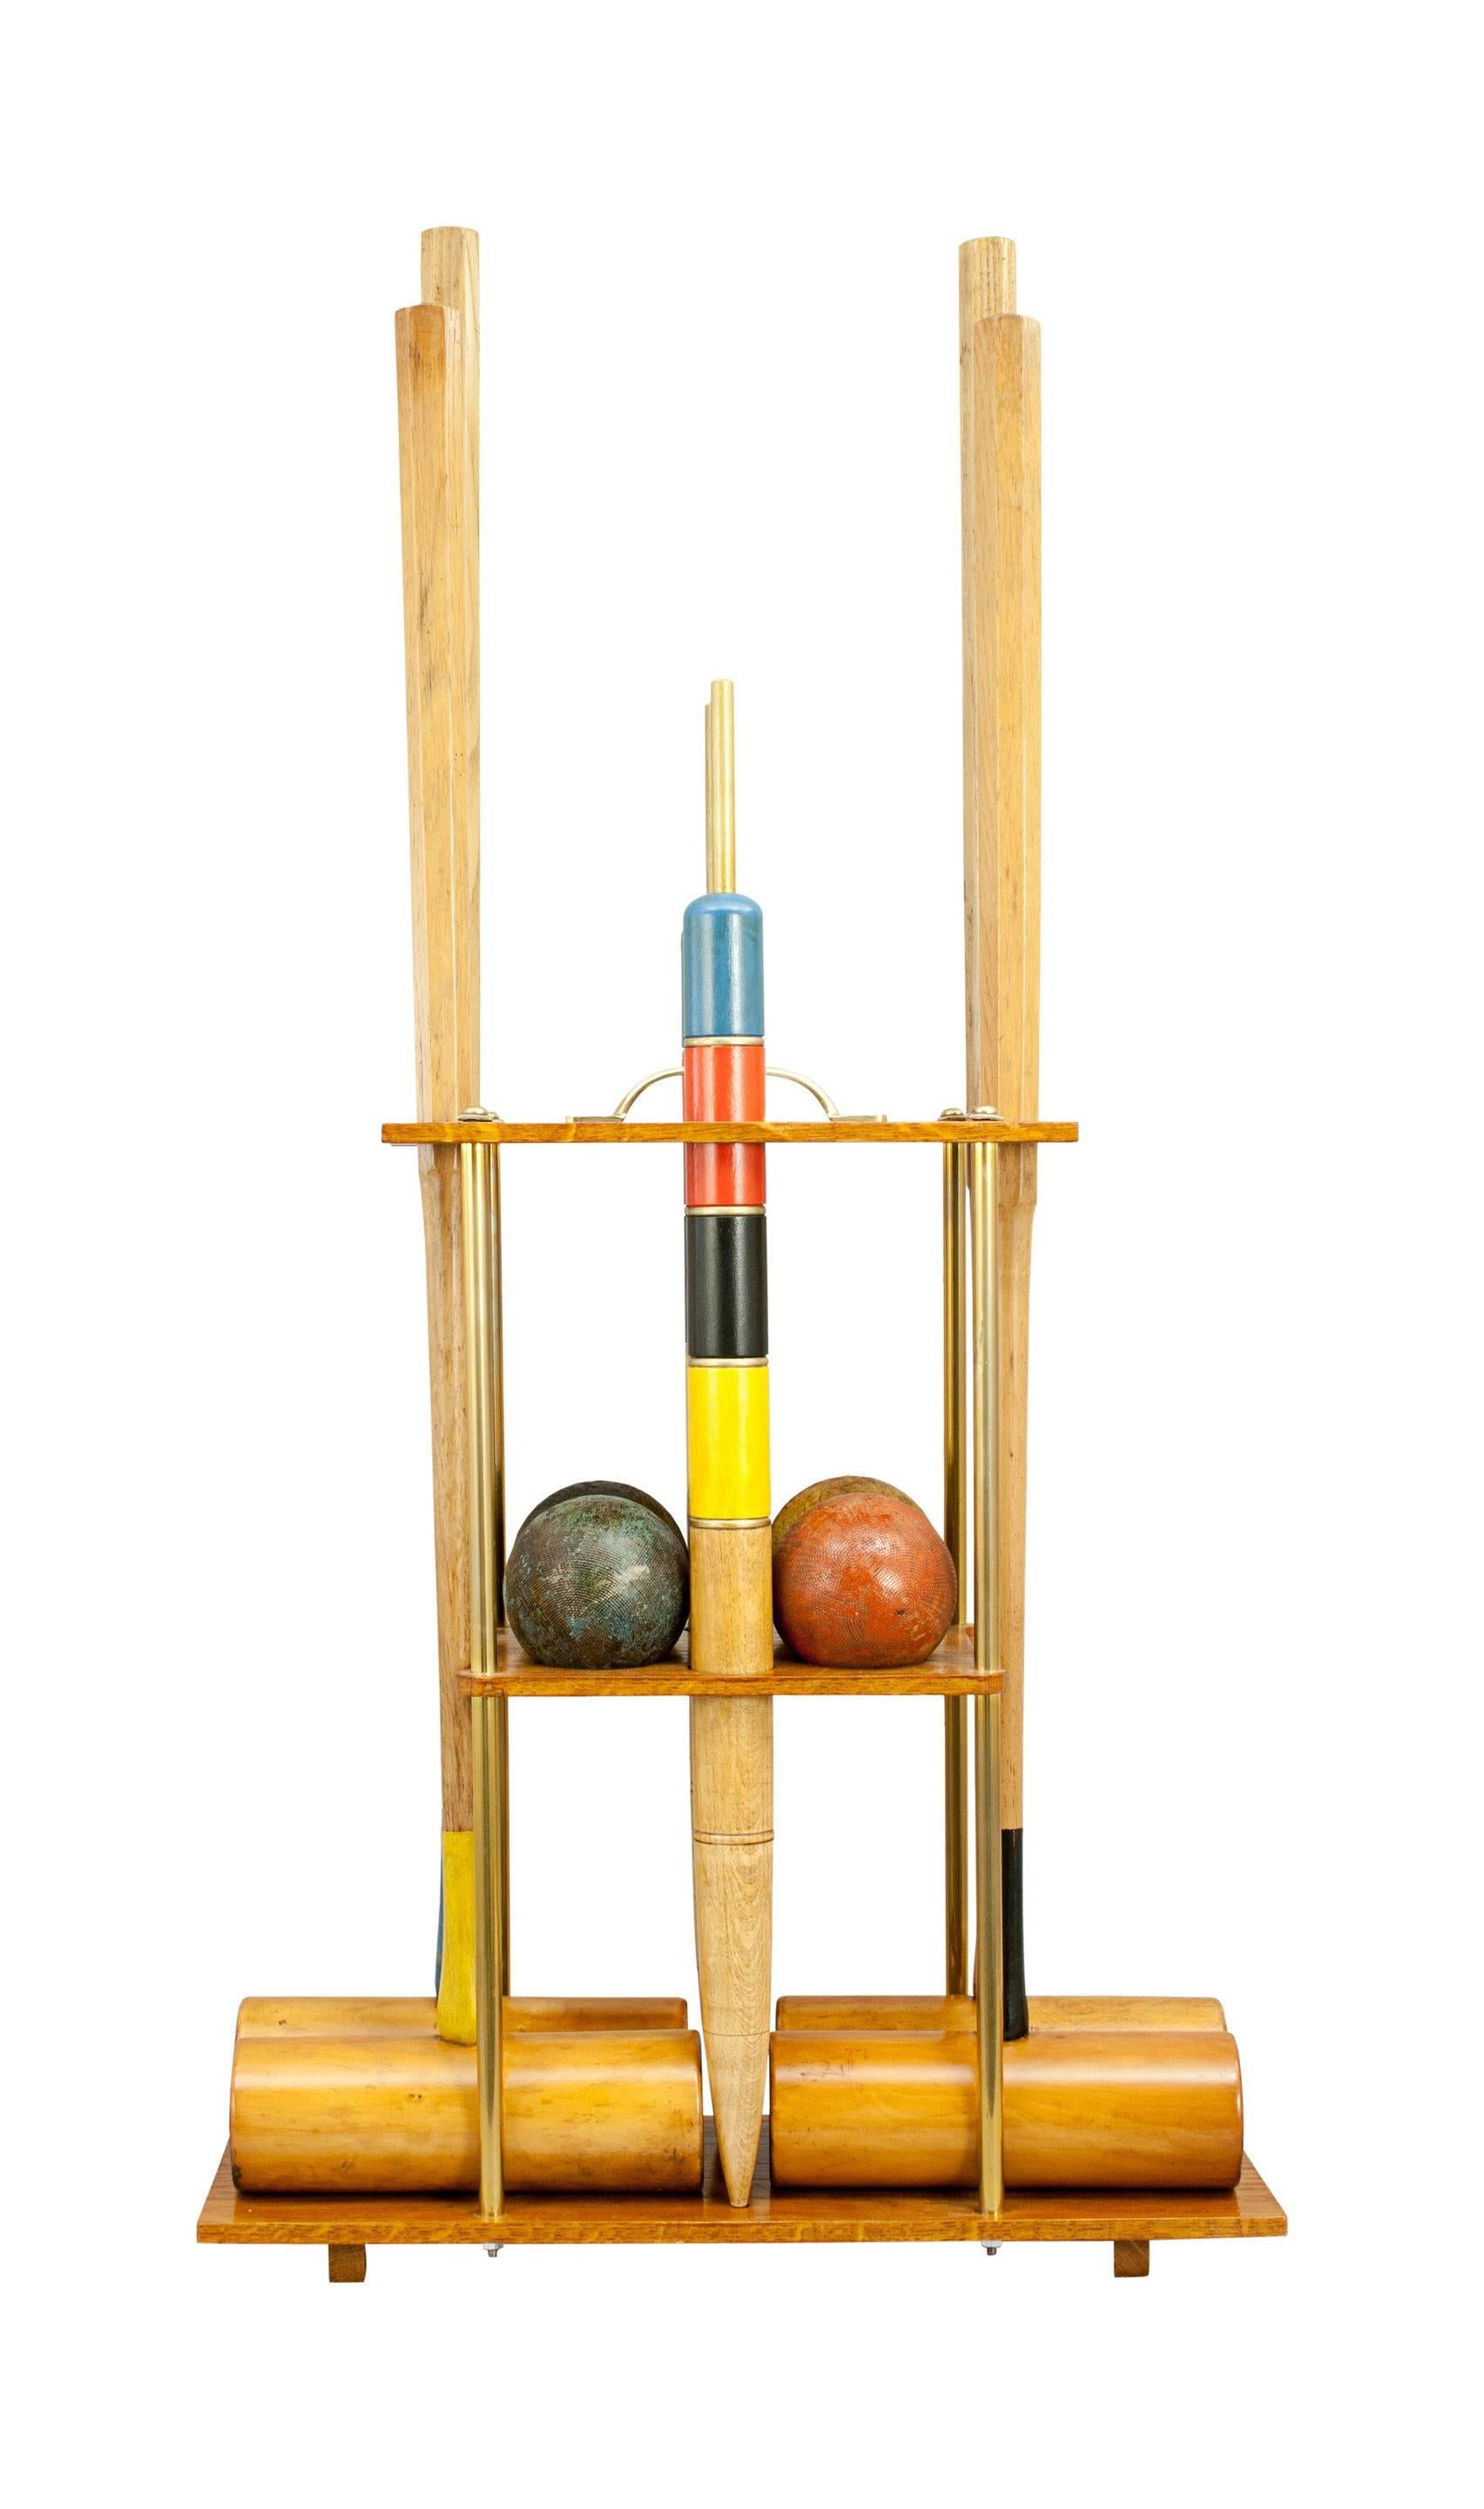 Vintage F.H. Ayres Croquet Set.
A high quality F.H. Ayres croquet set on a new oak carry stand. The set is with four boxwood croquet mallets. All mallets are with octagonal ash handles and marked 'F.H.Ayres'. To complete the set there are four